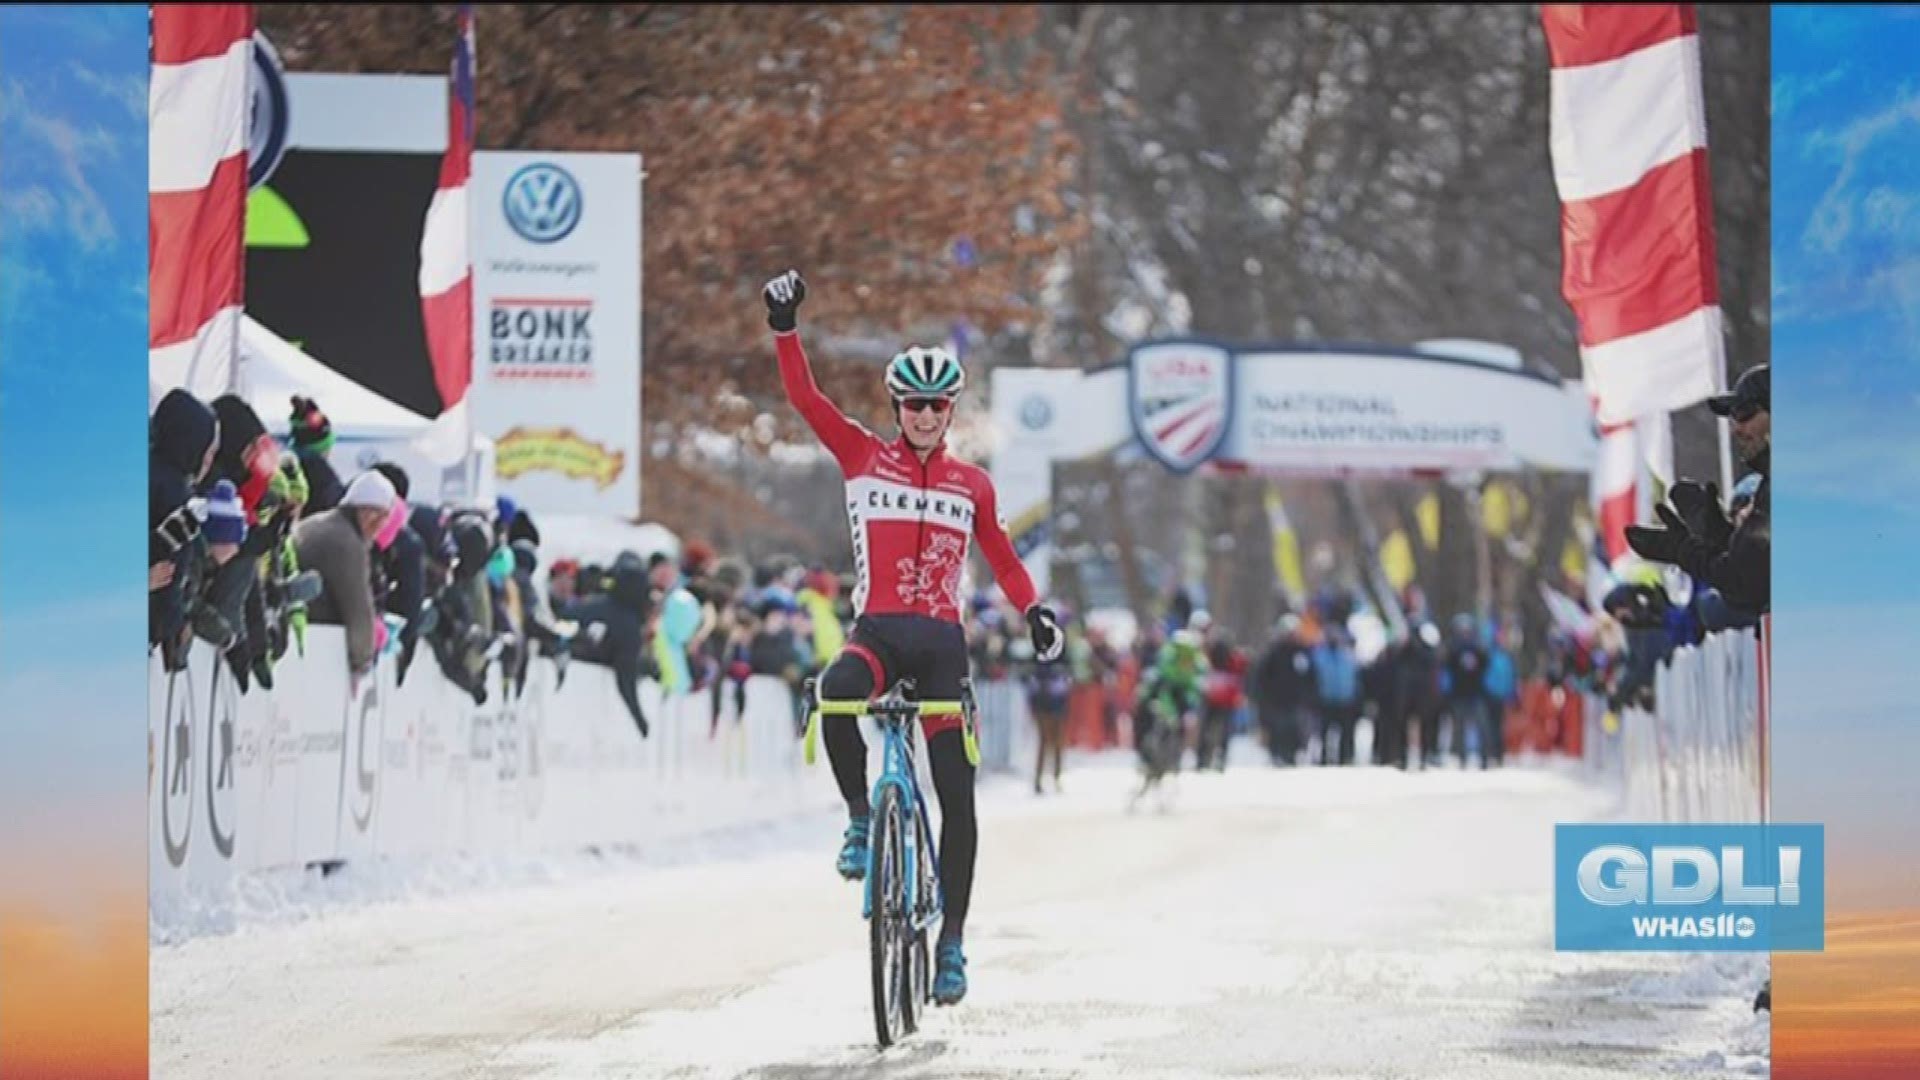 he USA Cyclocross National Championships are underway through Sunday, December 16, 2018. Joe Creason Park is located at 1297 Trevilian Way in Louisville, KY.